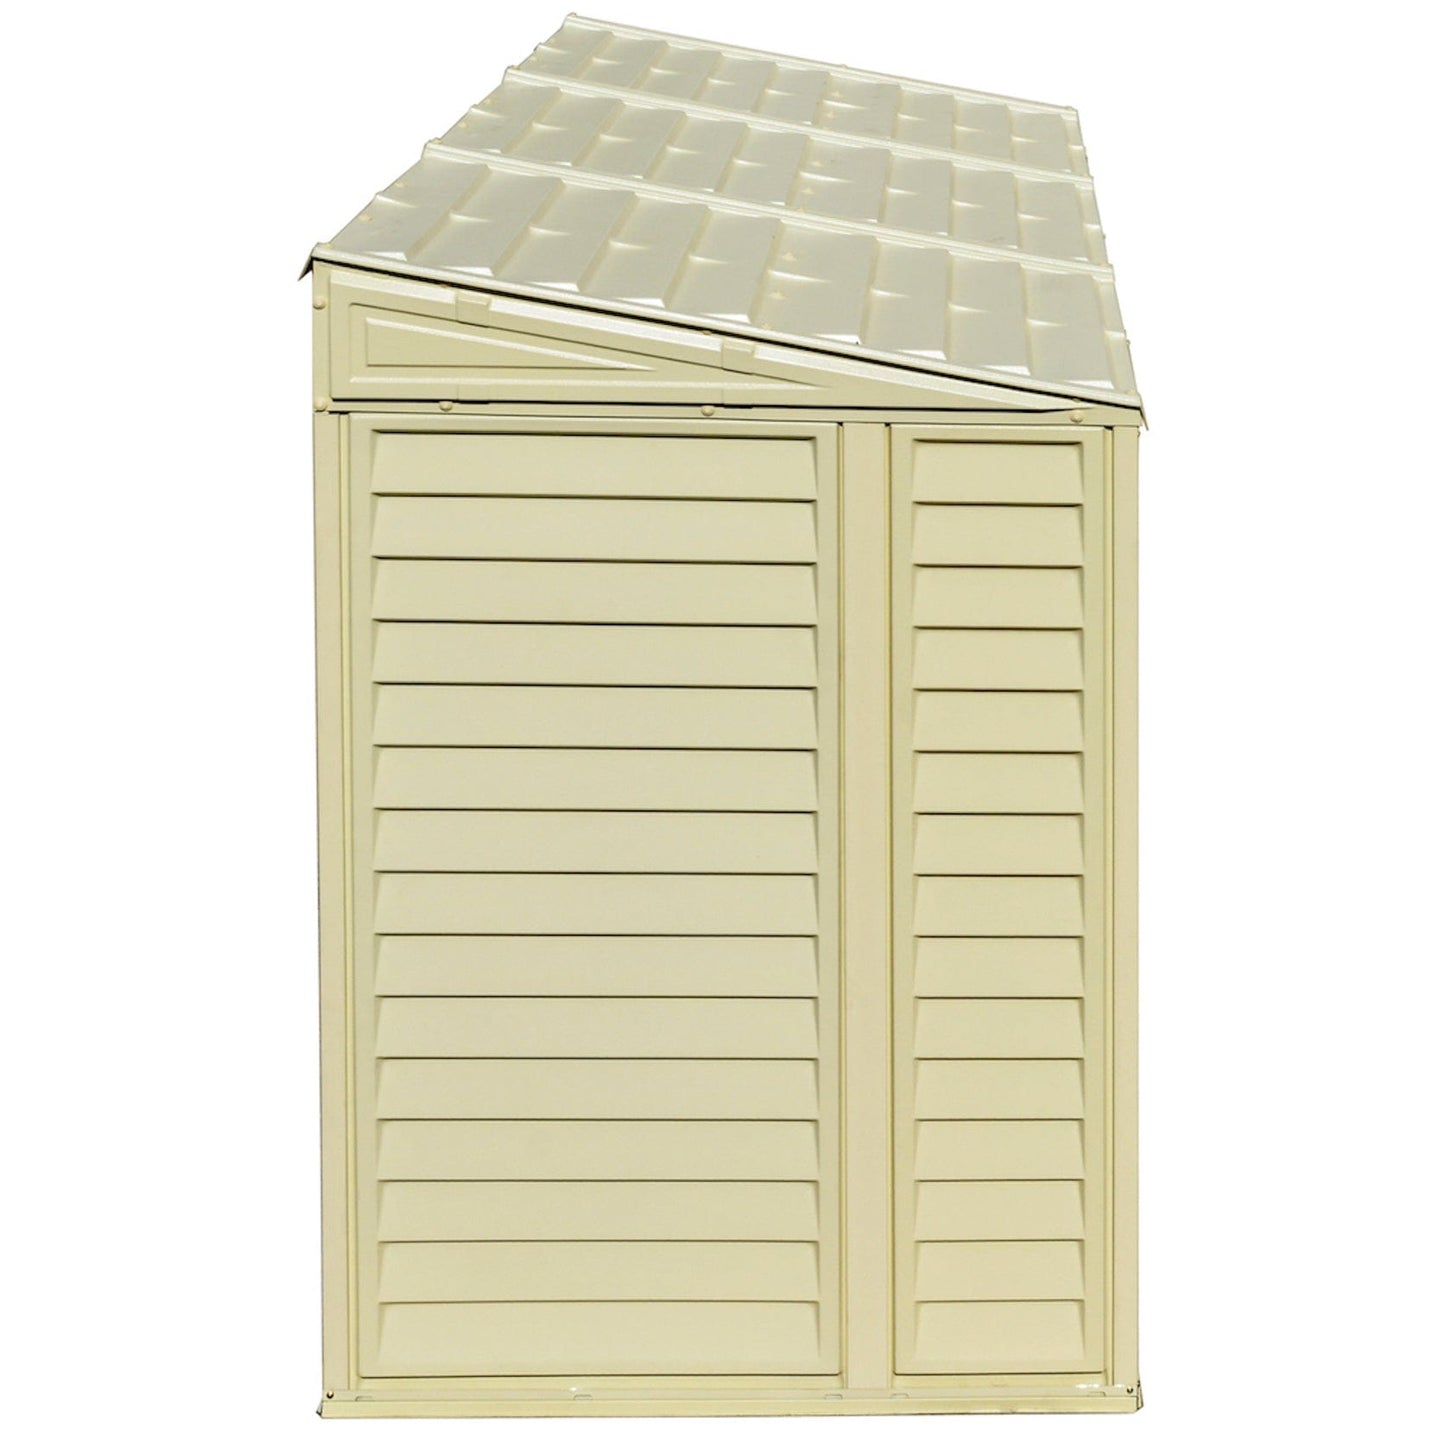 DuraMax Vinyl Shed 4x8 SideMate with Foundation Kit